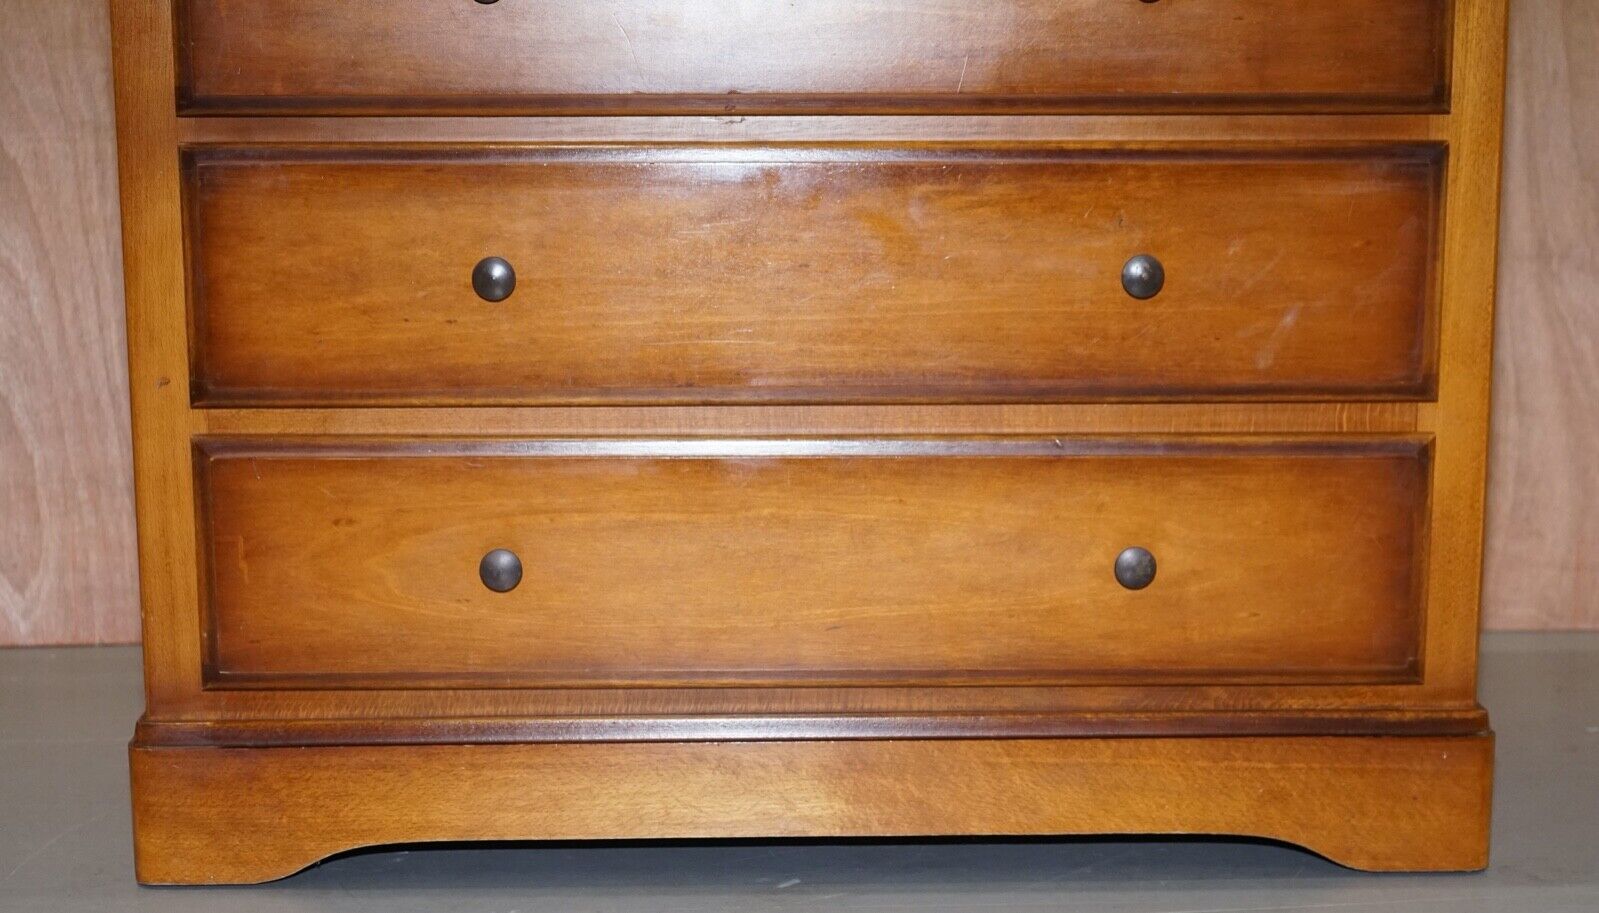 BEAUTIFUL WOODEN FRENCH STYLE CHEST OF DRAWERS